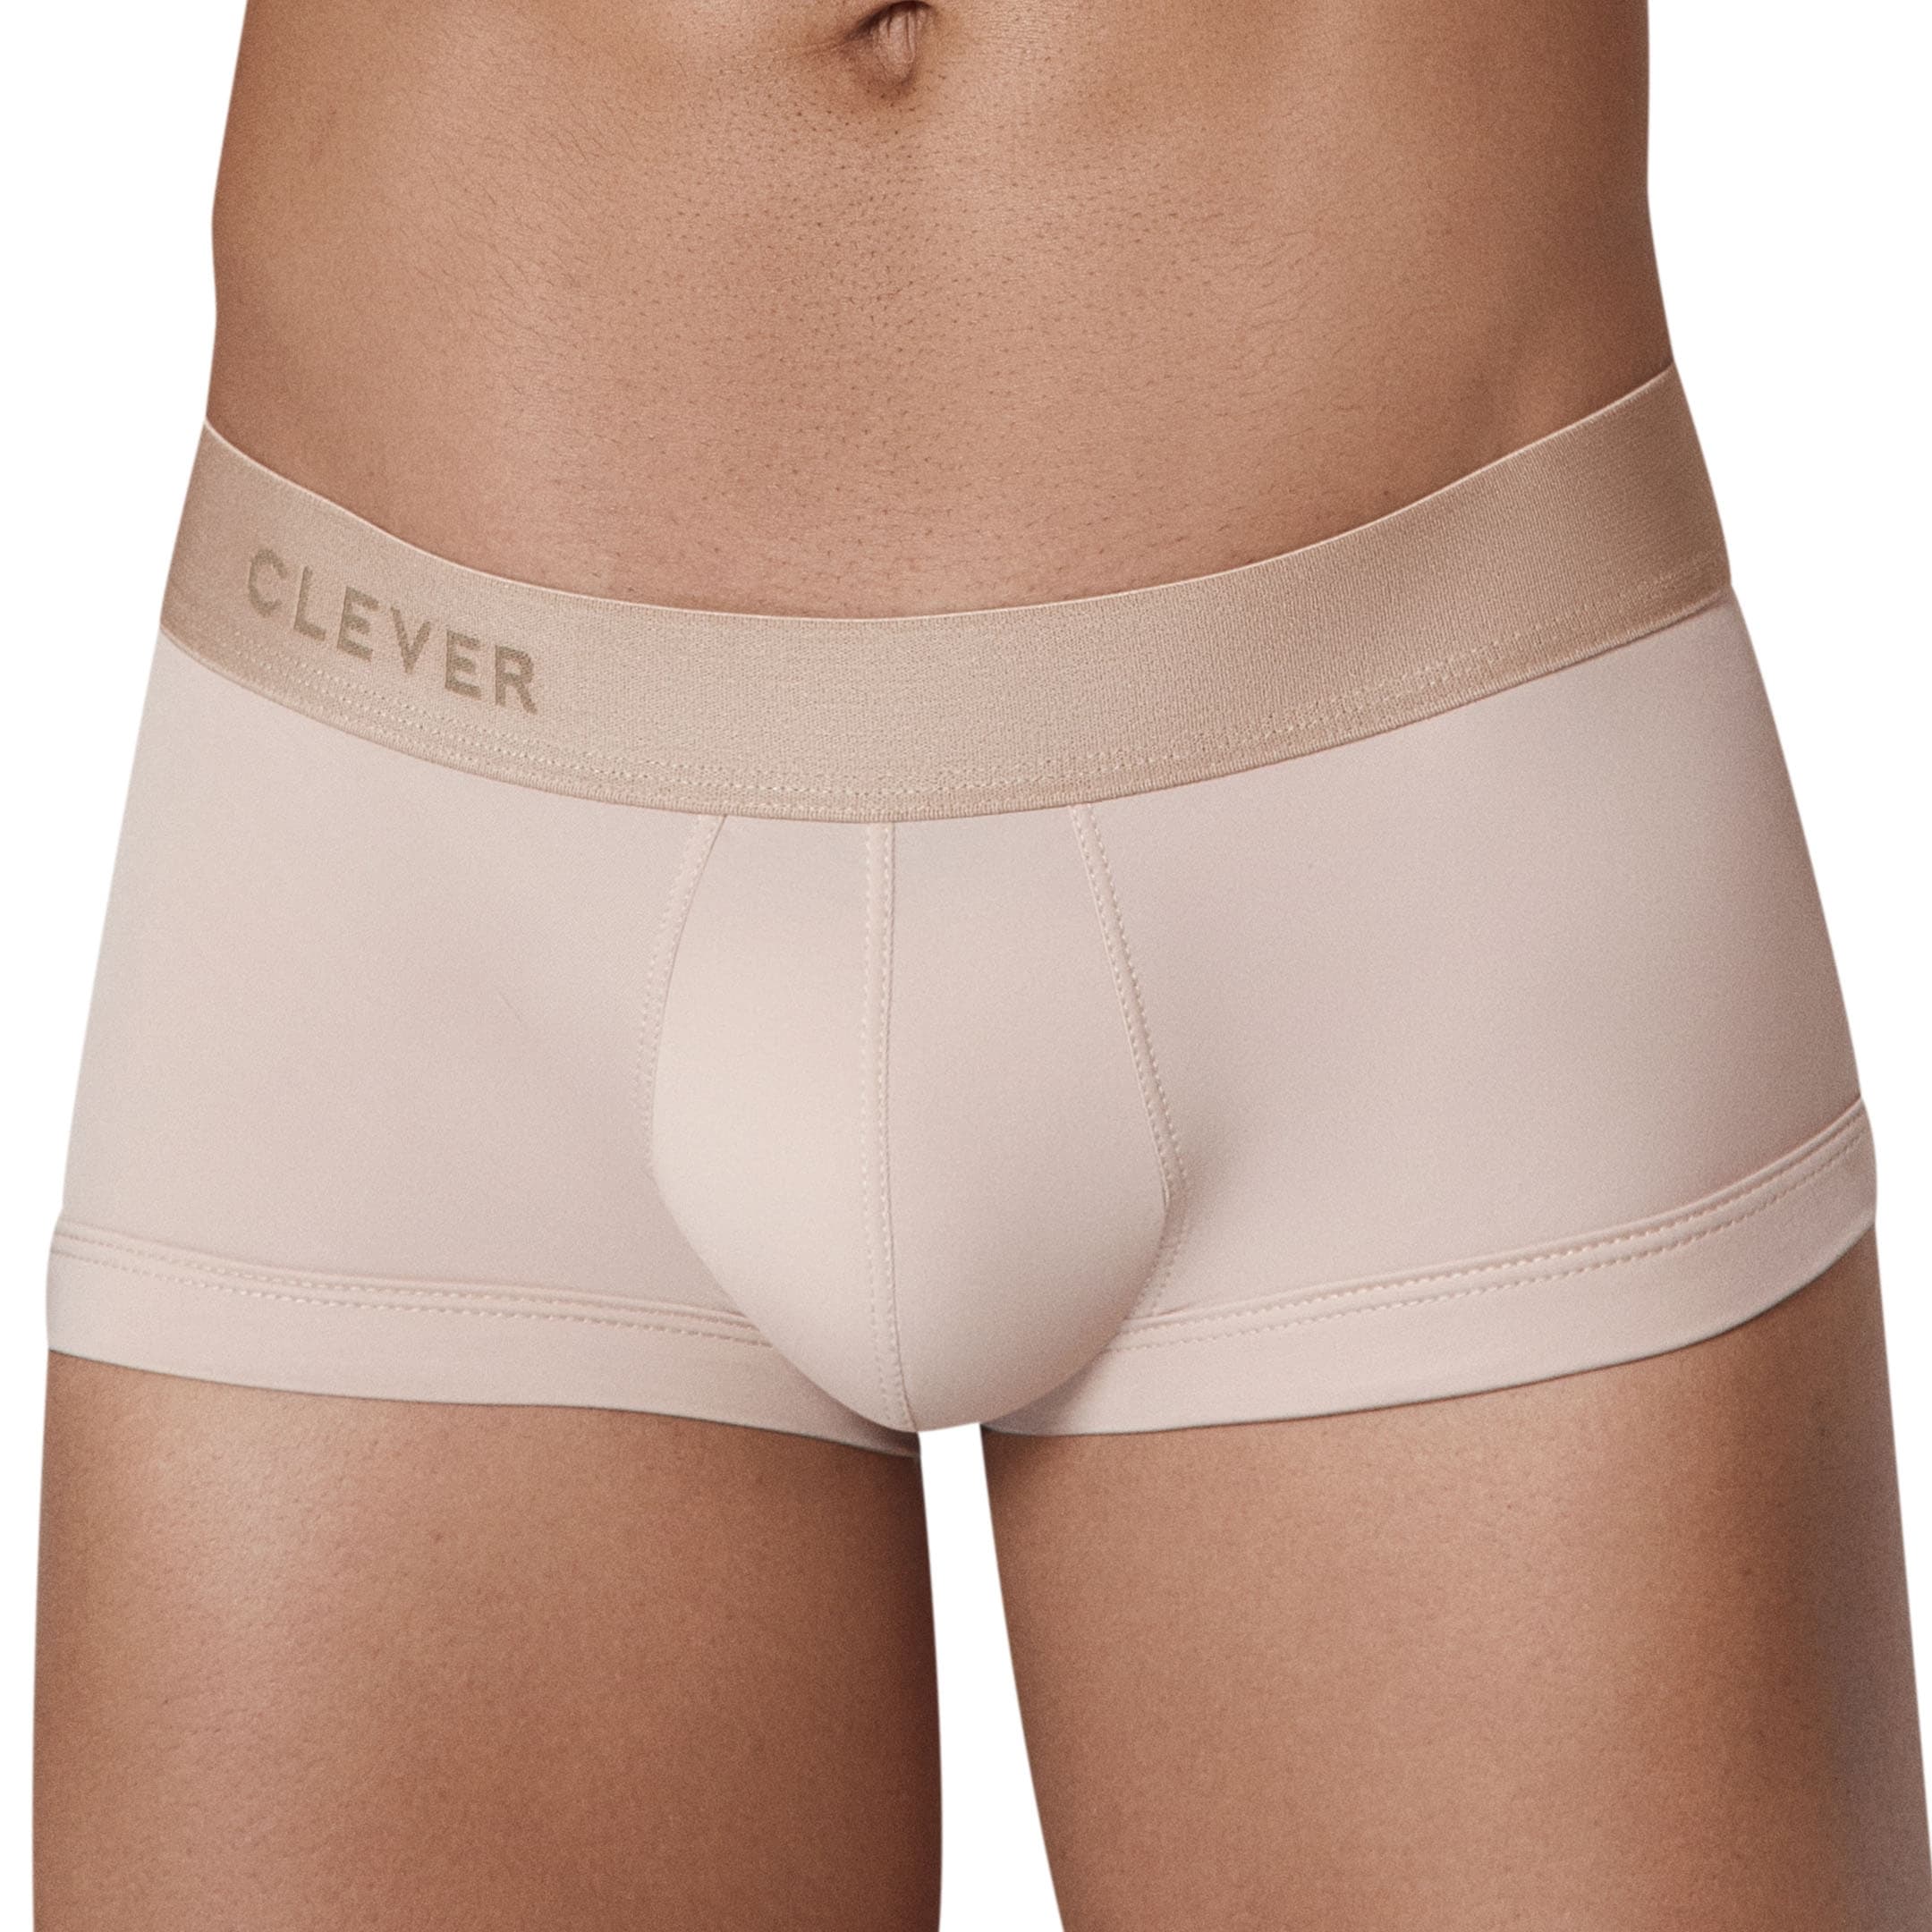 Clever Tribe Trunks - Beige